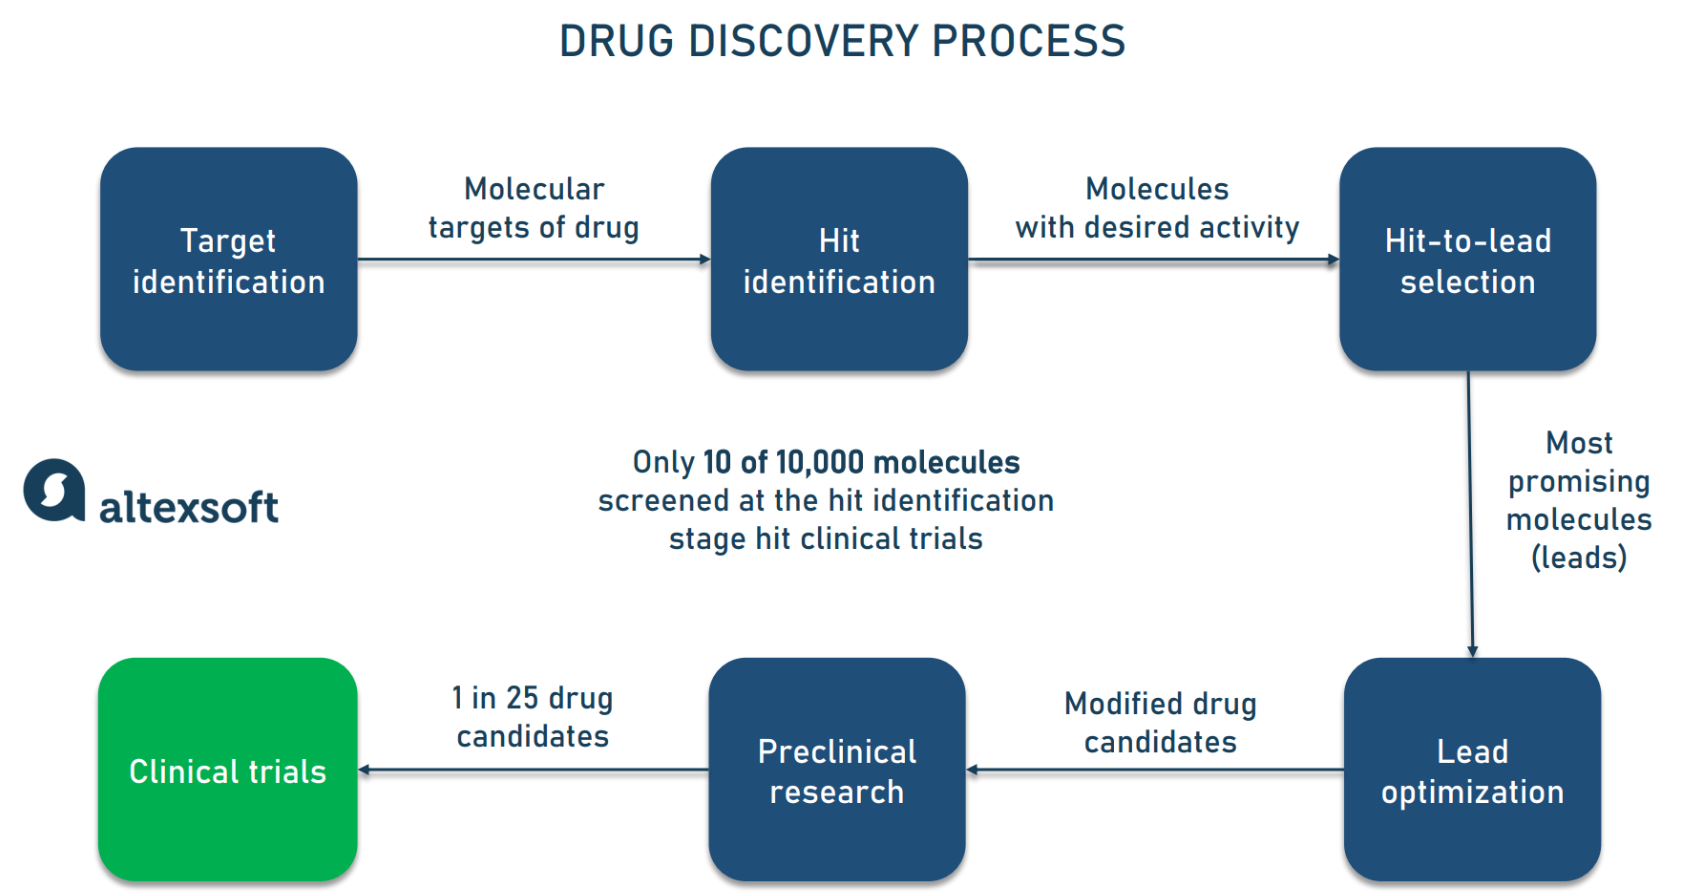 Drig discovery process